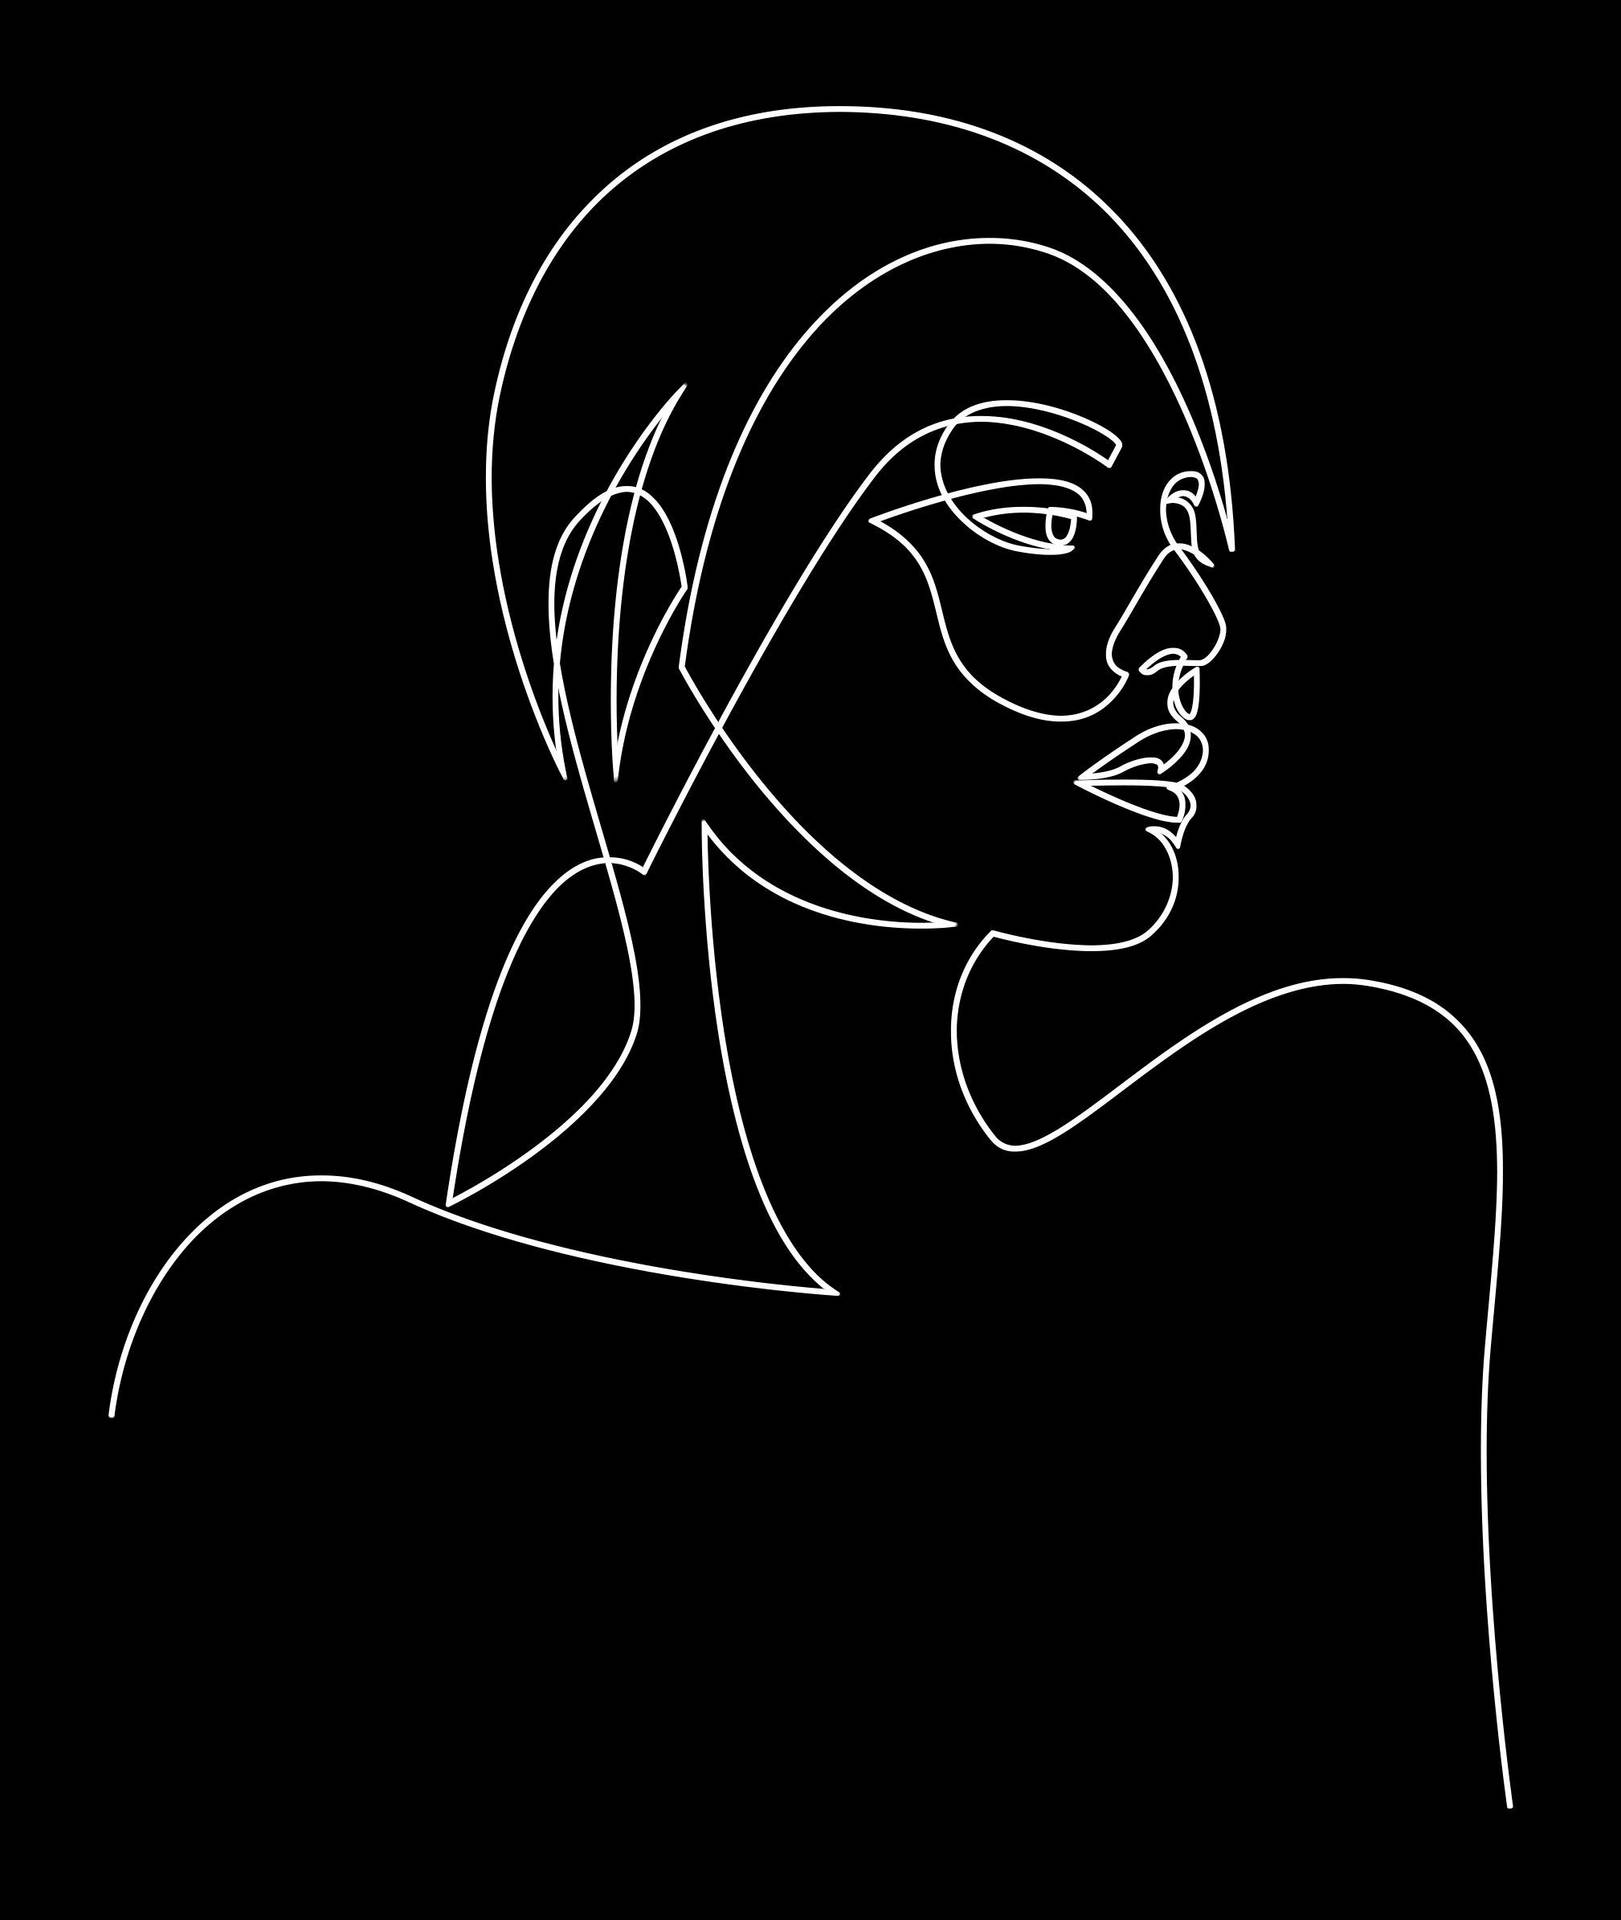 Free One Line Drawing Wallpaper Downloads, [100+] One Line Drawing  Wallpapers for FREE 